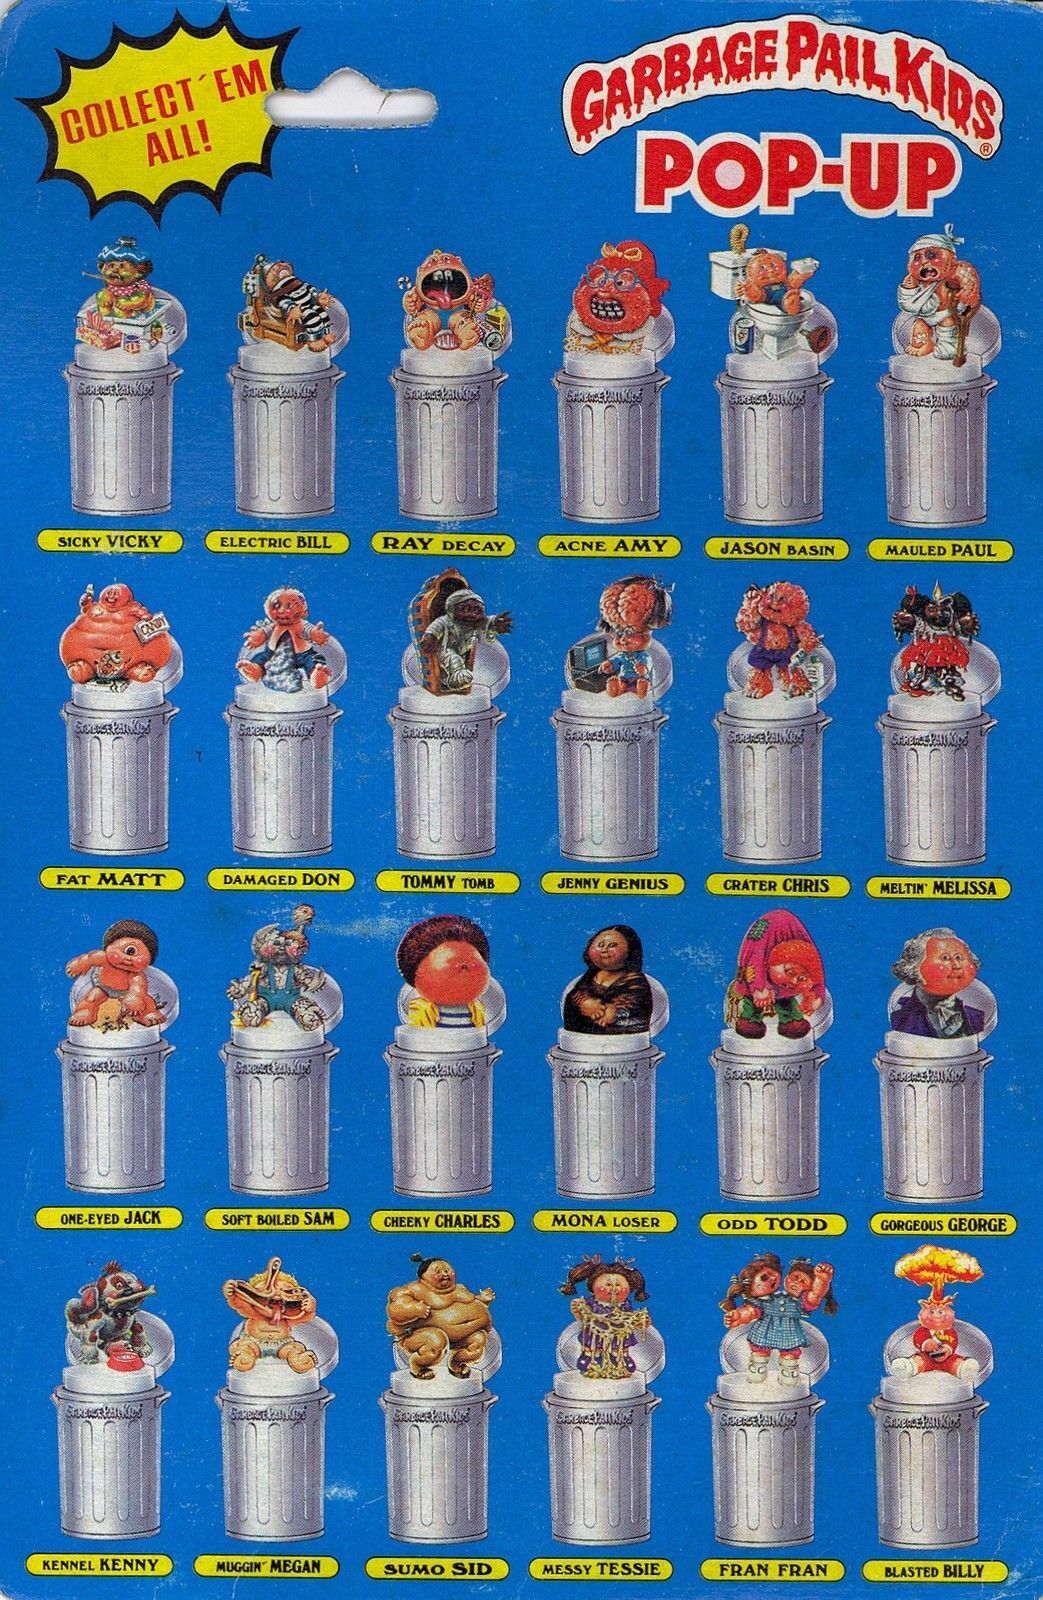 1985 Topps Imperial Toys GARBAGE PAIL KIDS GHASTLY ASHLEY Pop-Up GPK Image 2